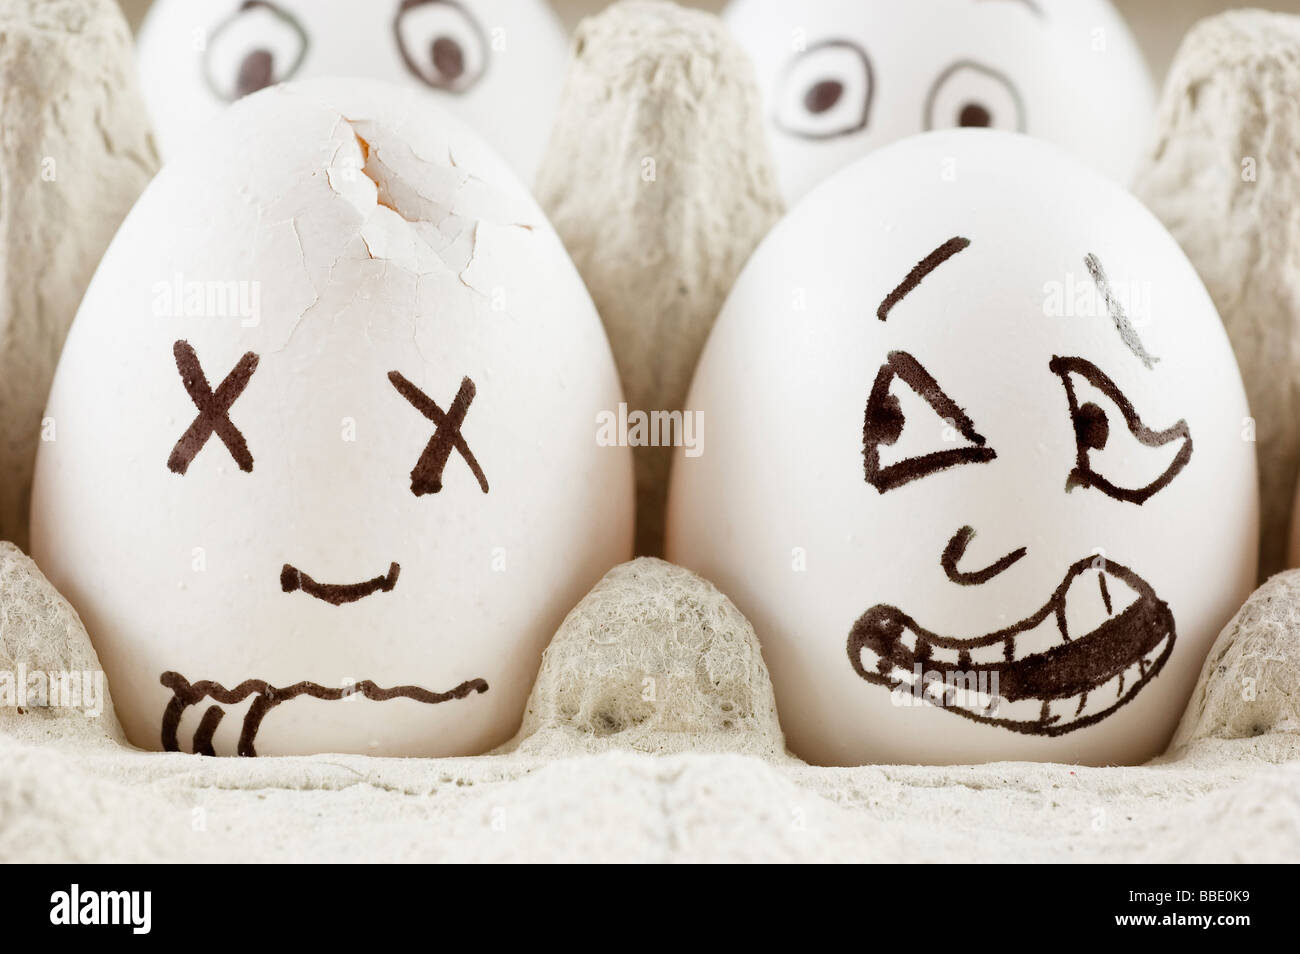 Eggs are scared as they see dead friend Stock Photo